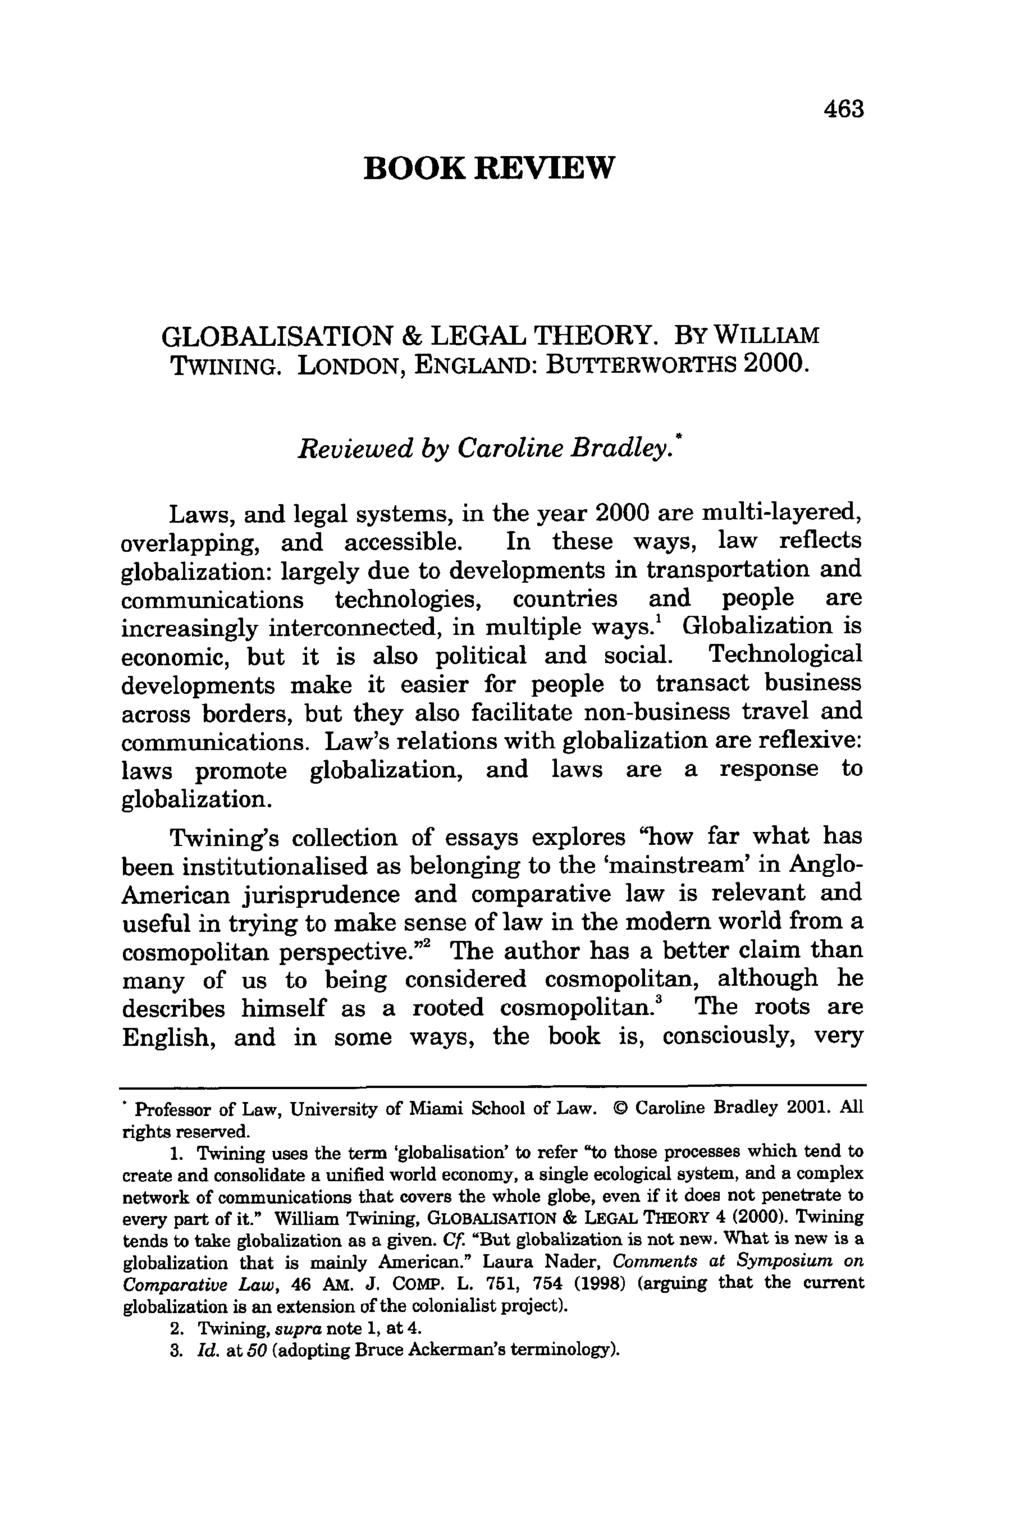 463 BOOK REVIEW GLOBALISATION & LEGAL THEORY. BY WILLIAM TWINING. LONDON, ENGLAND: BUTTERWORTHS 2000. Reviewed by Caroline Bradley.